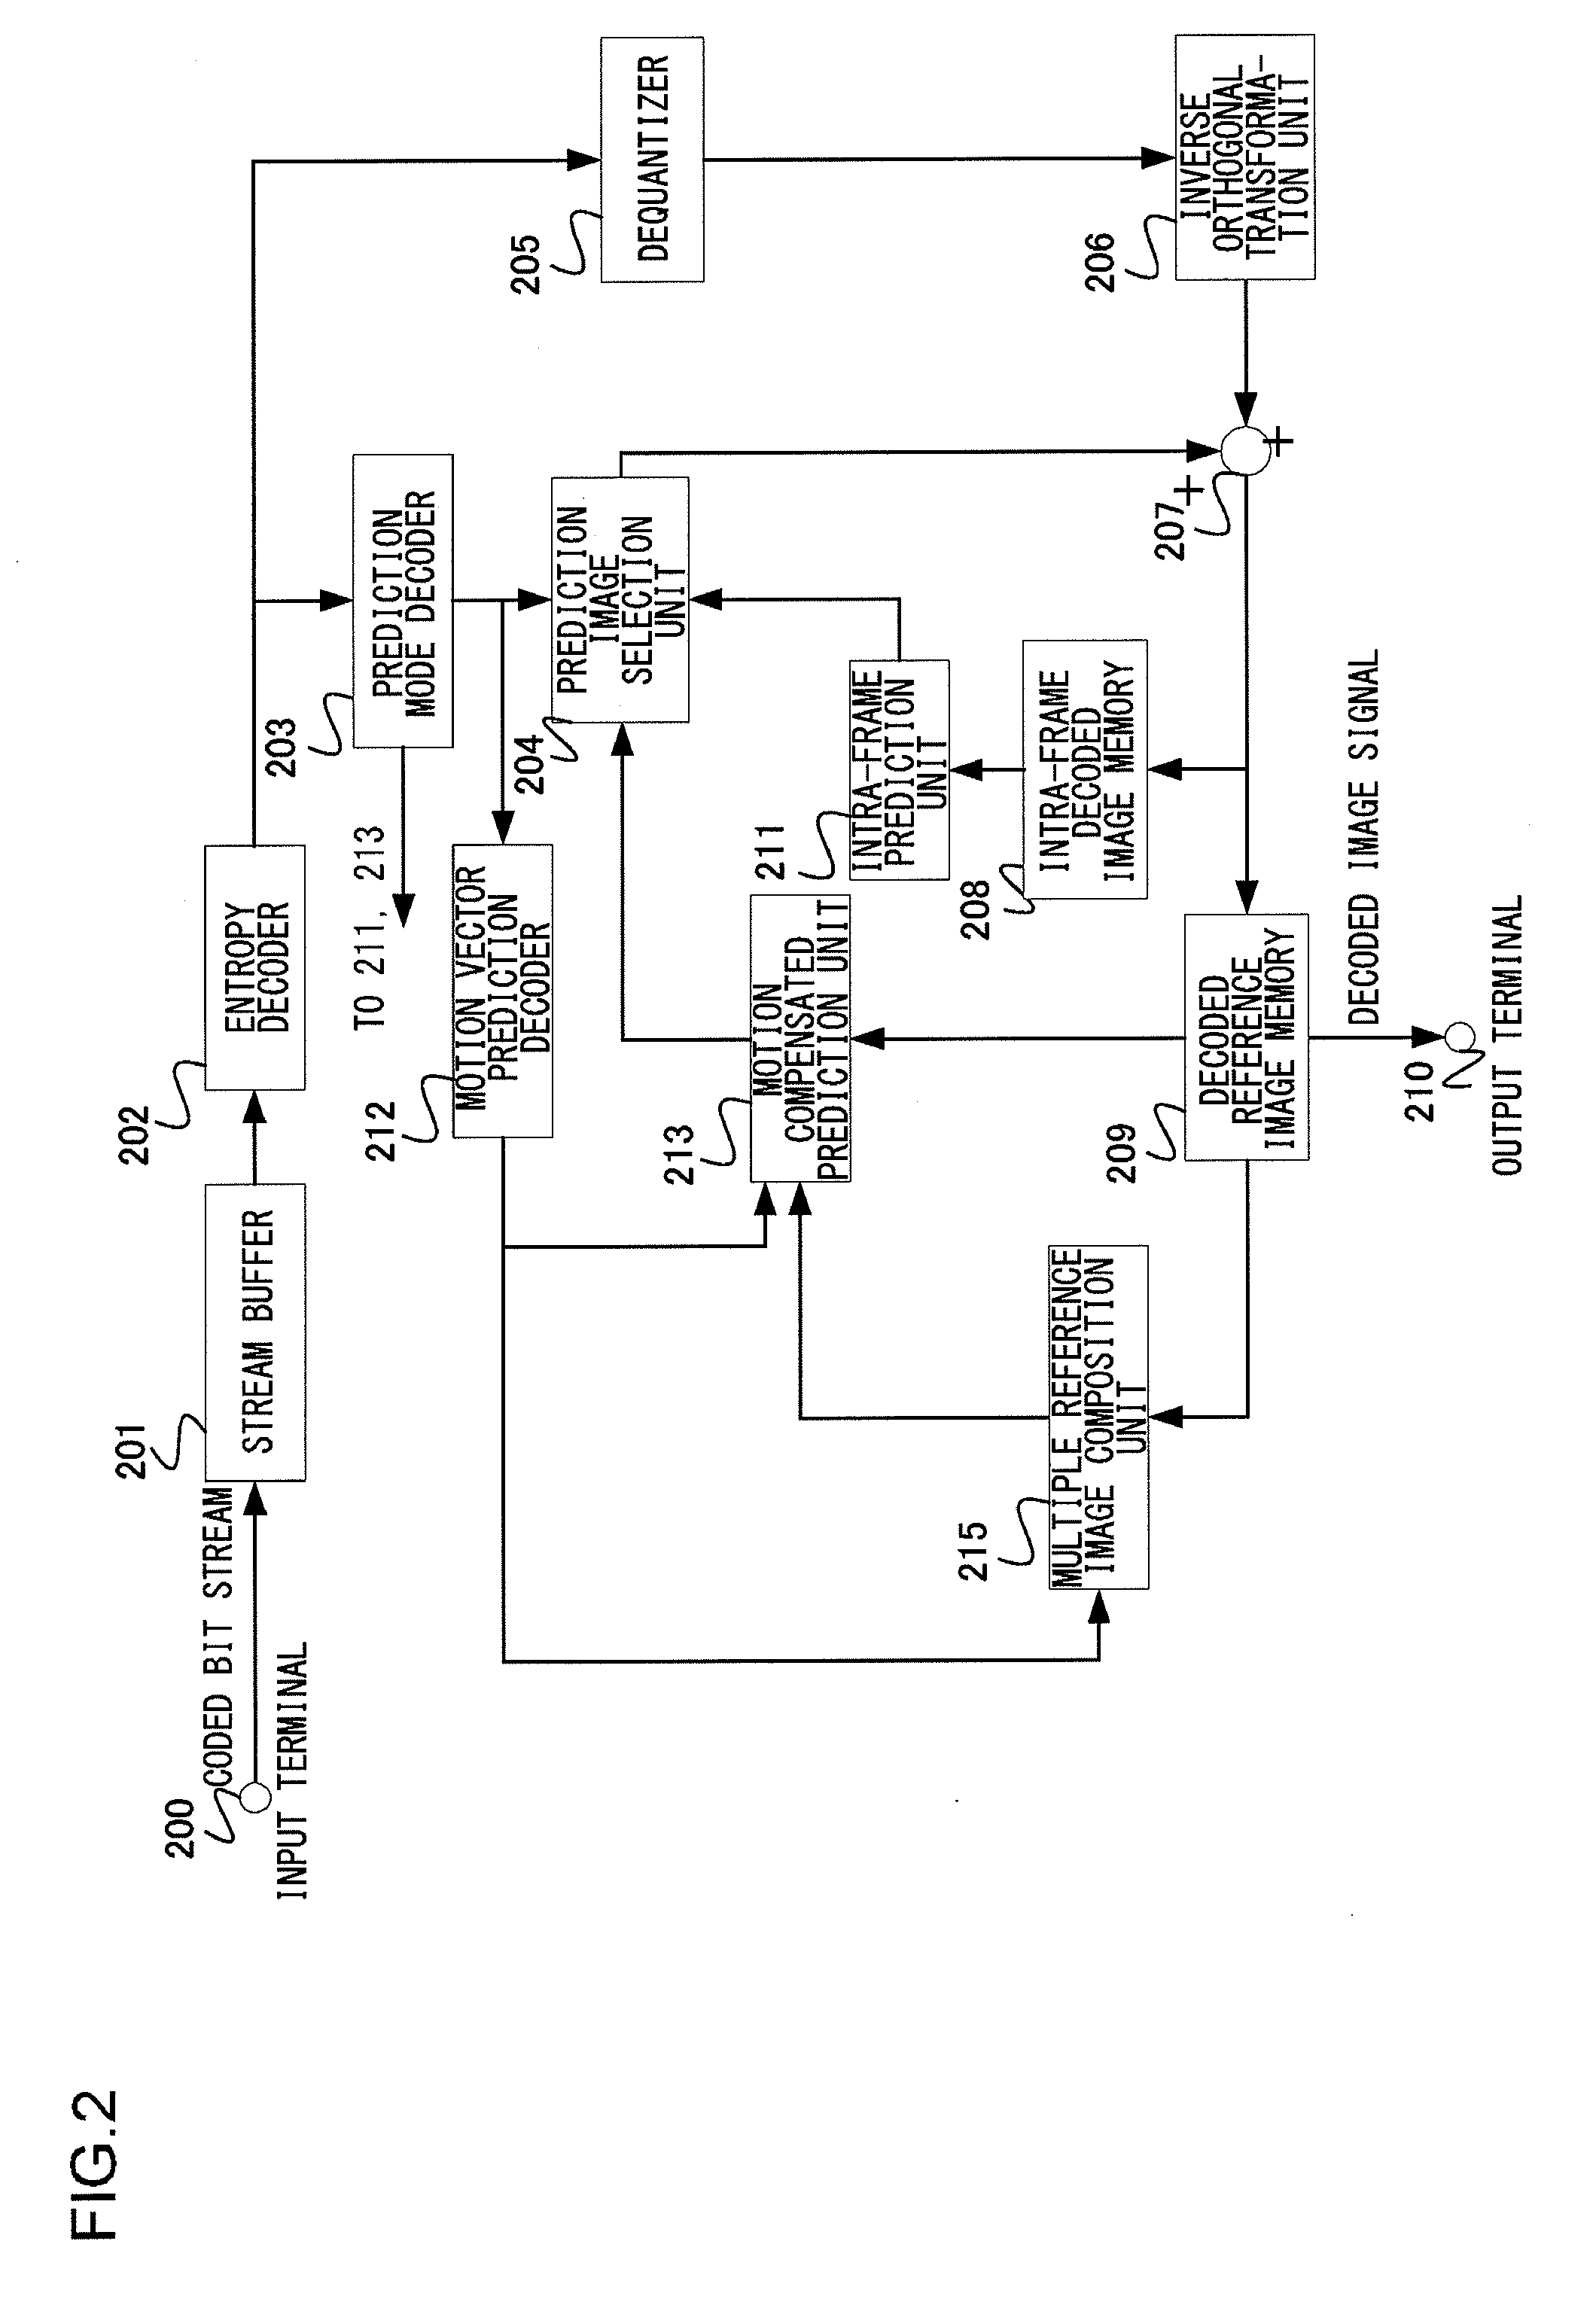 Video coding apparatus, video coding method and video coding program, and video decoding apparatus, video decoding method and video decoding program